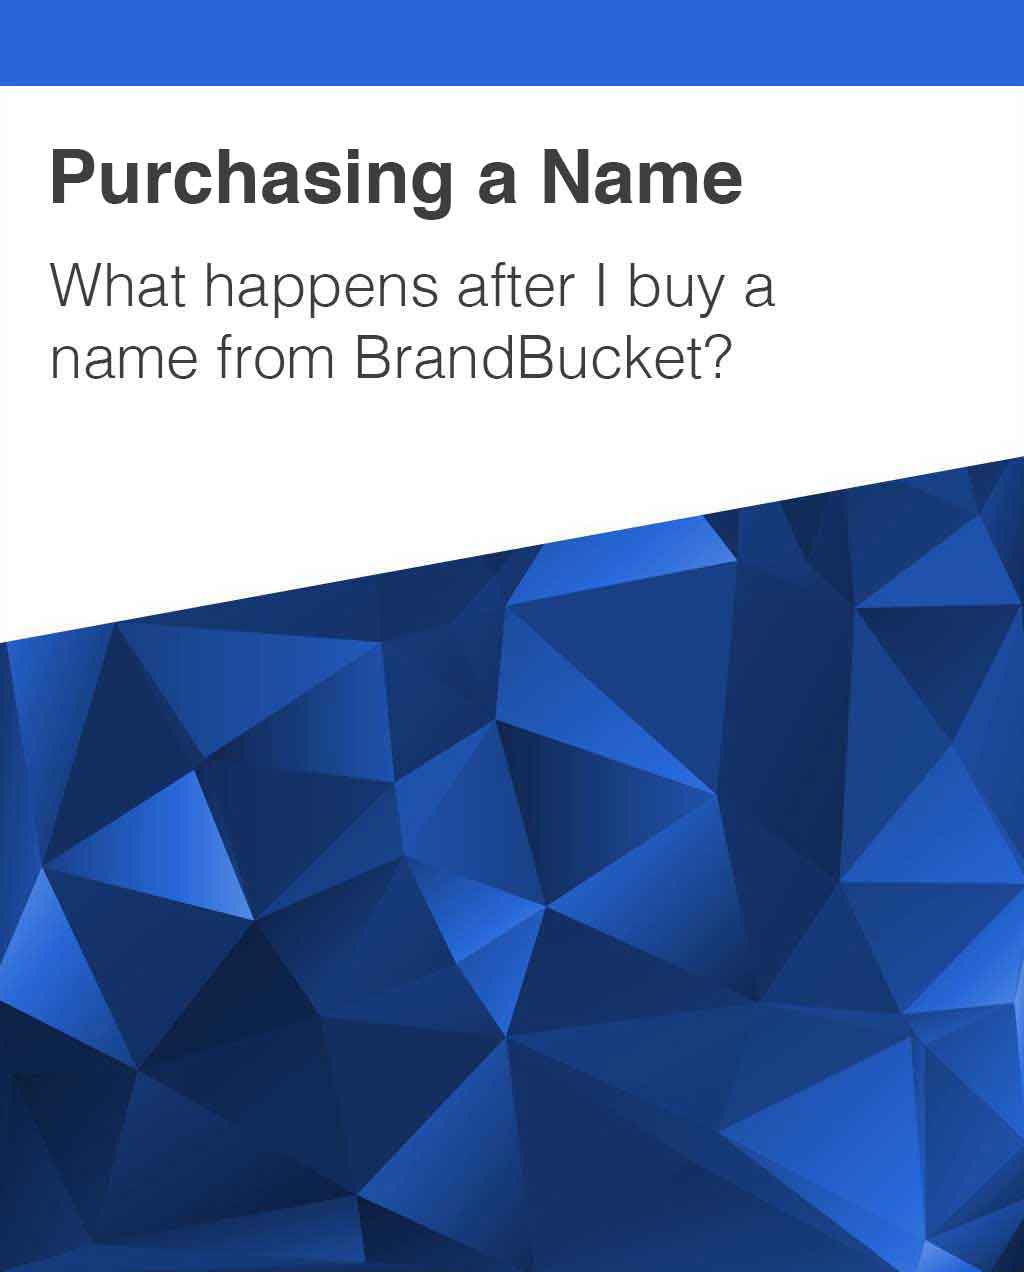 Buy a Name from BrandBucket